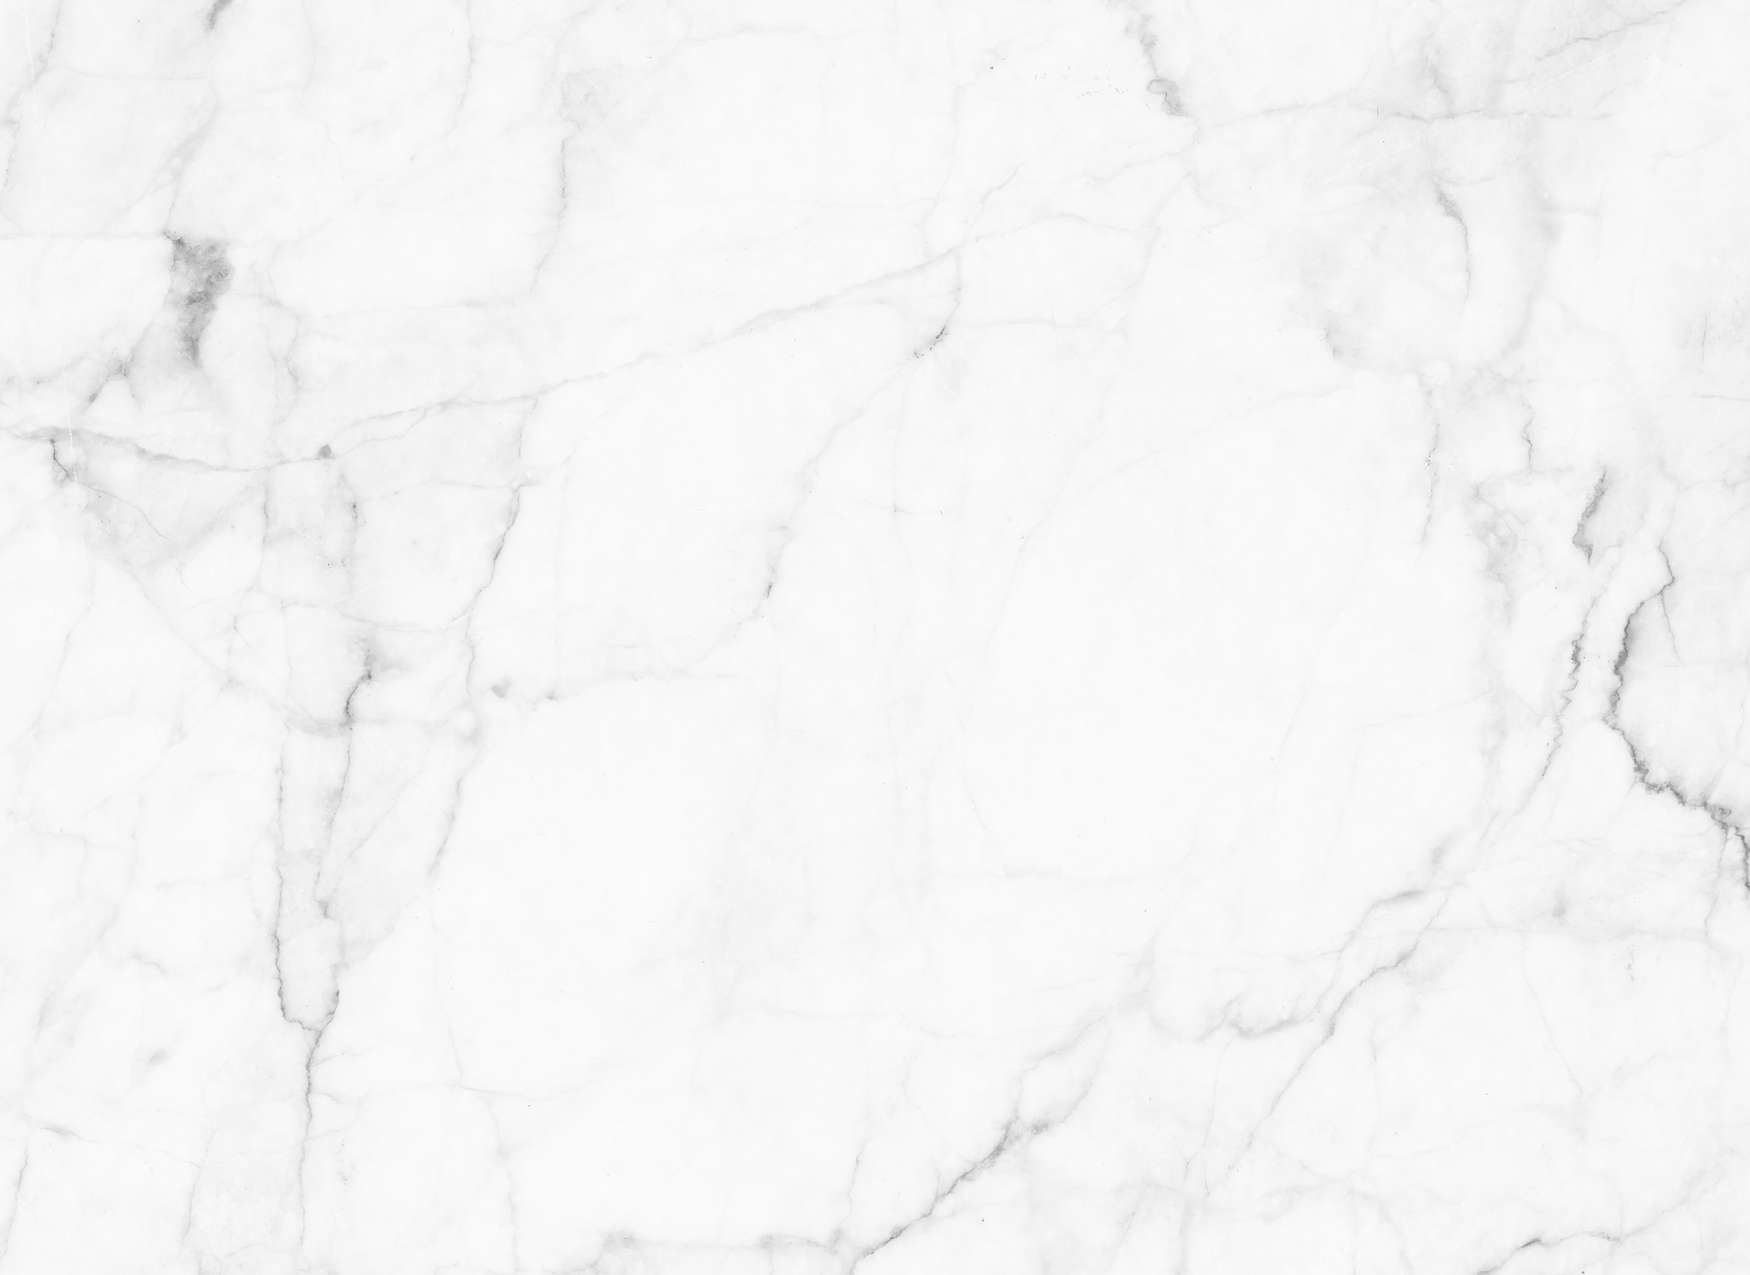             Photo wallpaper with subtle marble look - white, grey
        